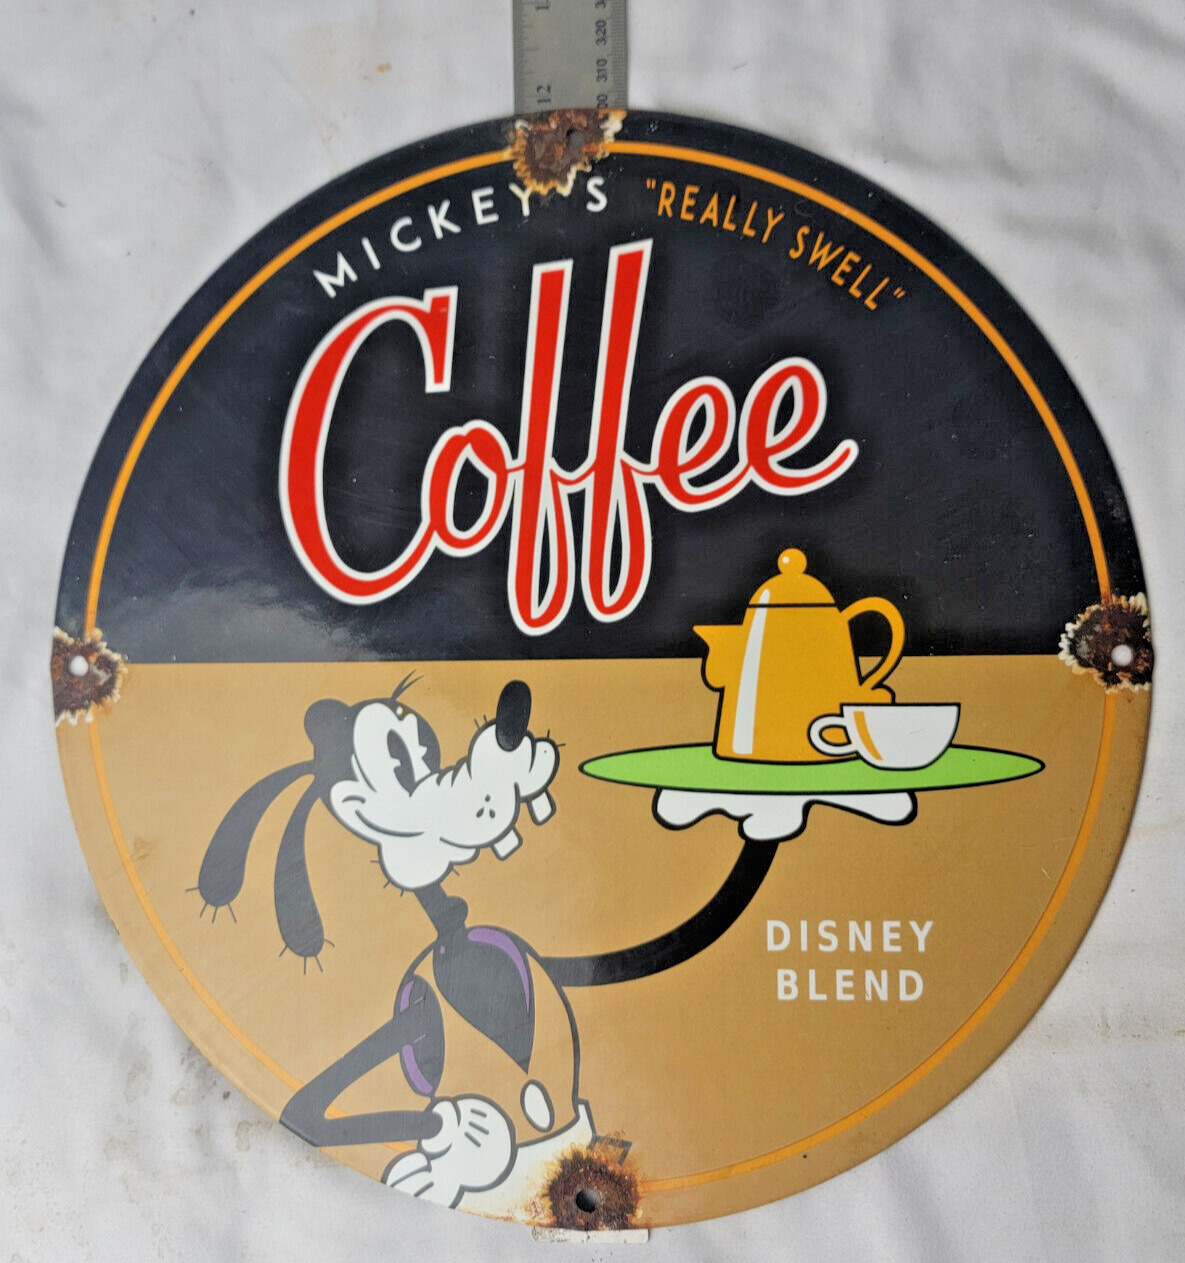 VINTAGE MICKEY'S COFFEE DISNEY PORCELAIN SIGN PUMP PLATE GAS STATION OIL SERVICE